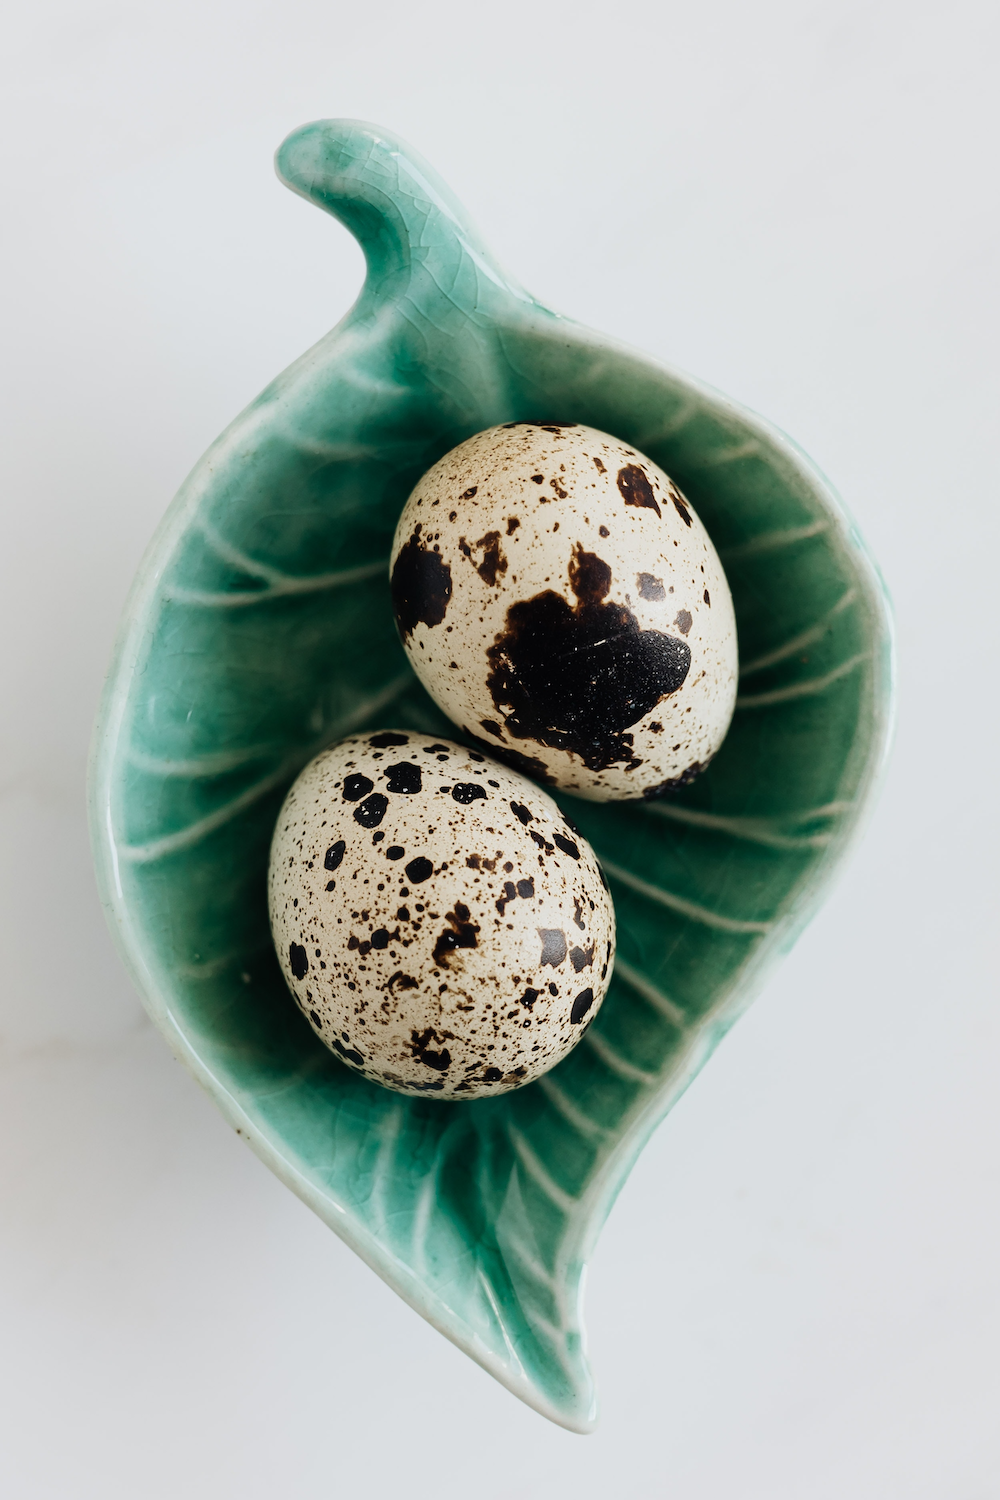 Two white-with-black-spotted quail eggs in a ceramic dish shaped like a green leaf.